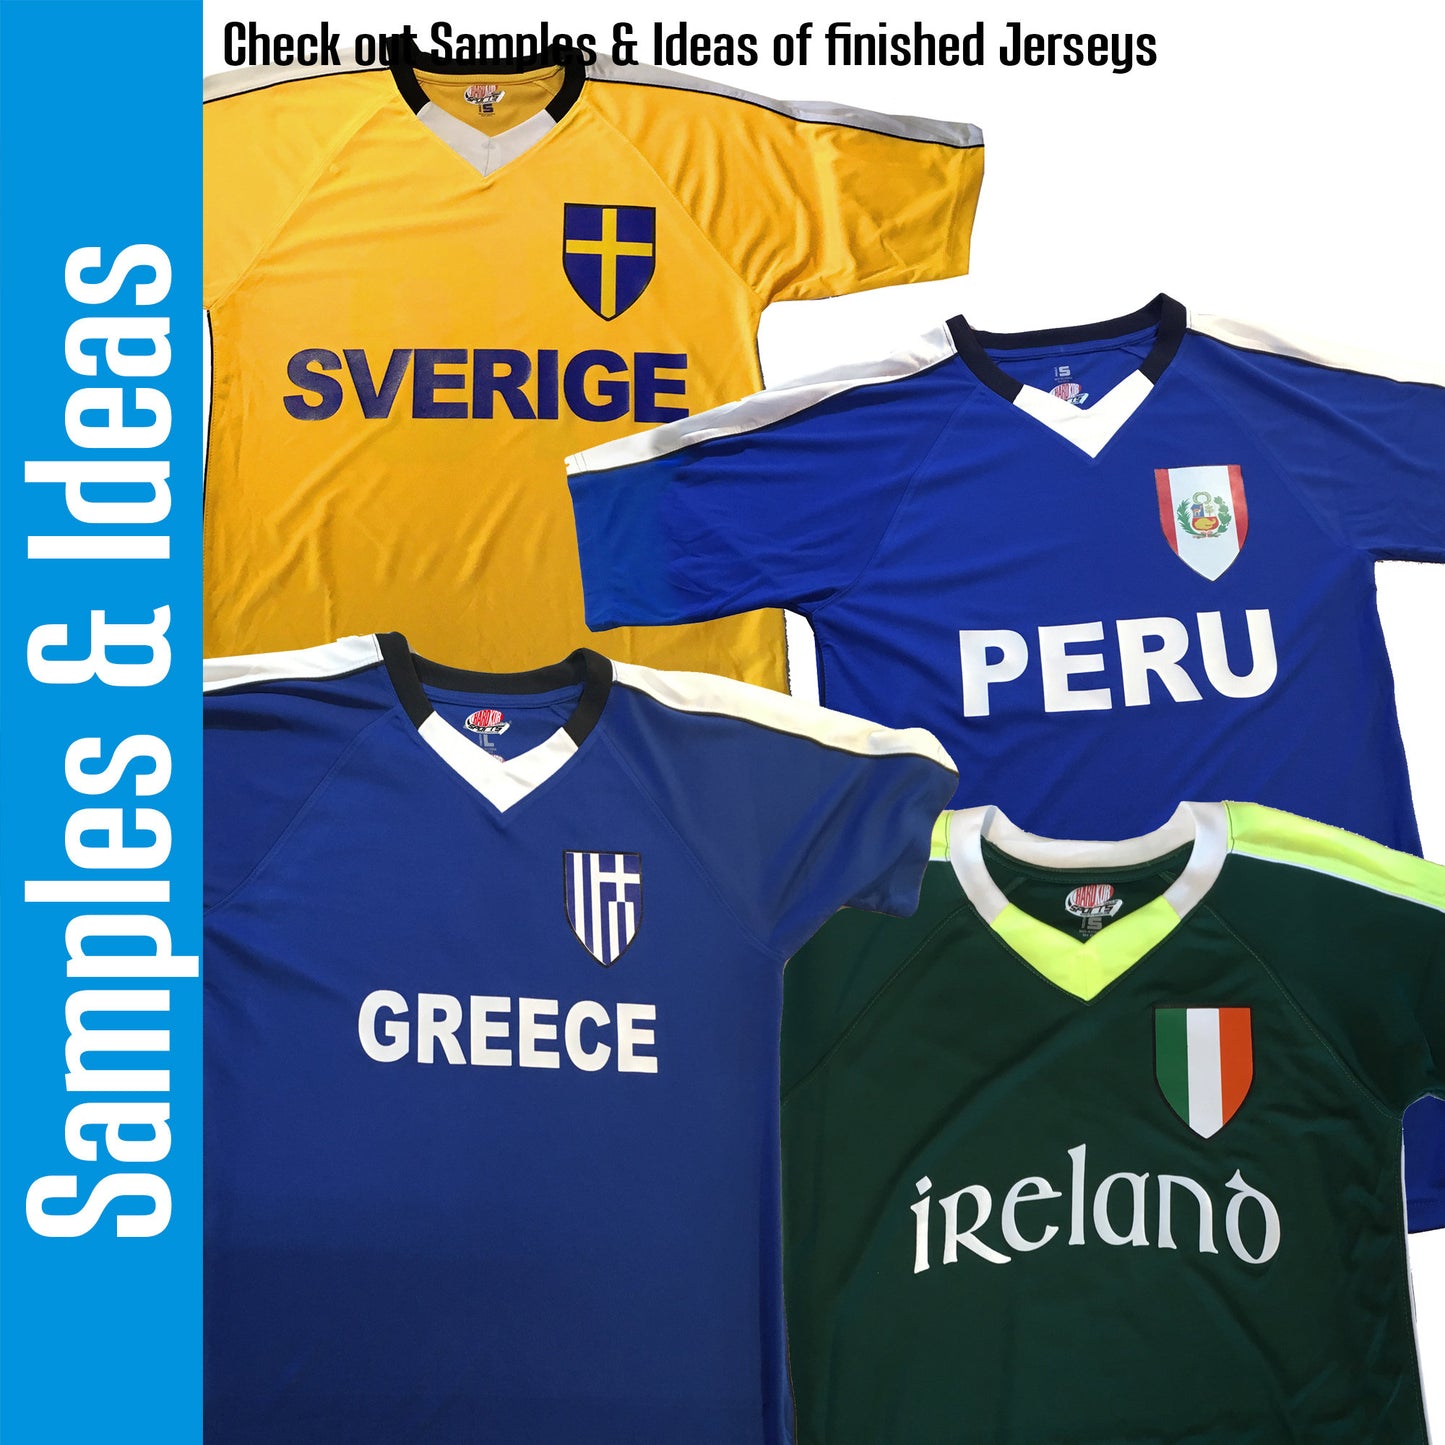 Customize a Uruguayan Soccer Jersey, Unique Uruguay Shield Design, Customized with Your Name and Number on back